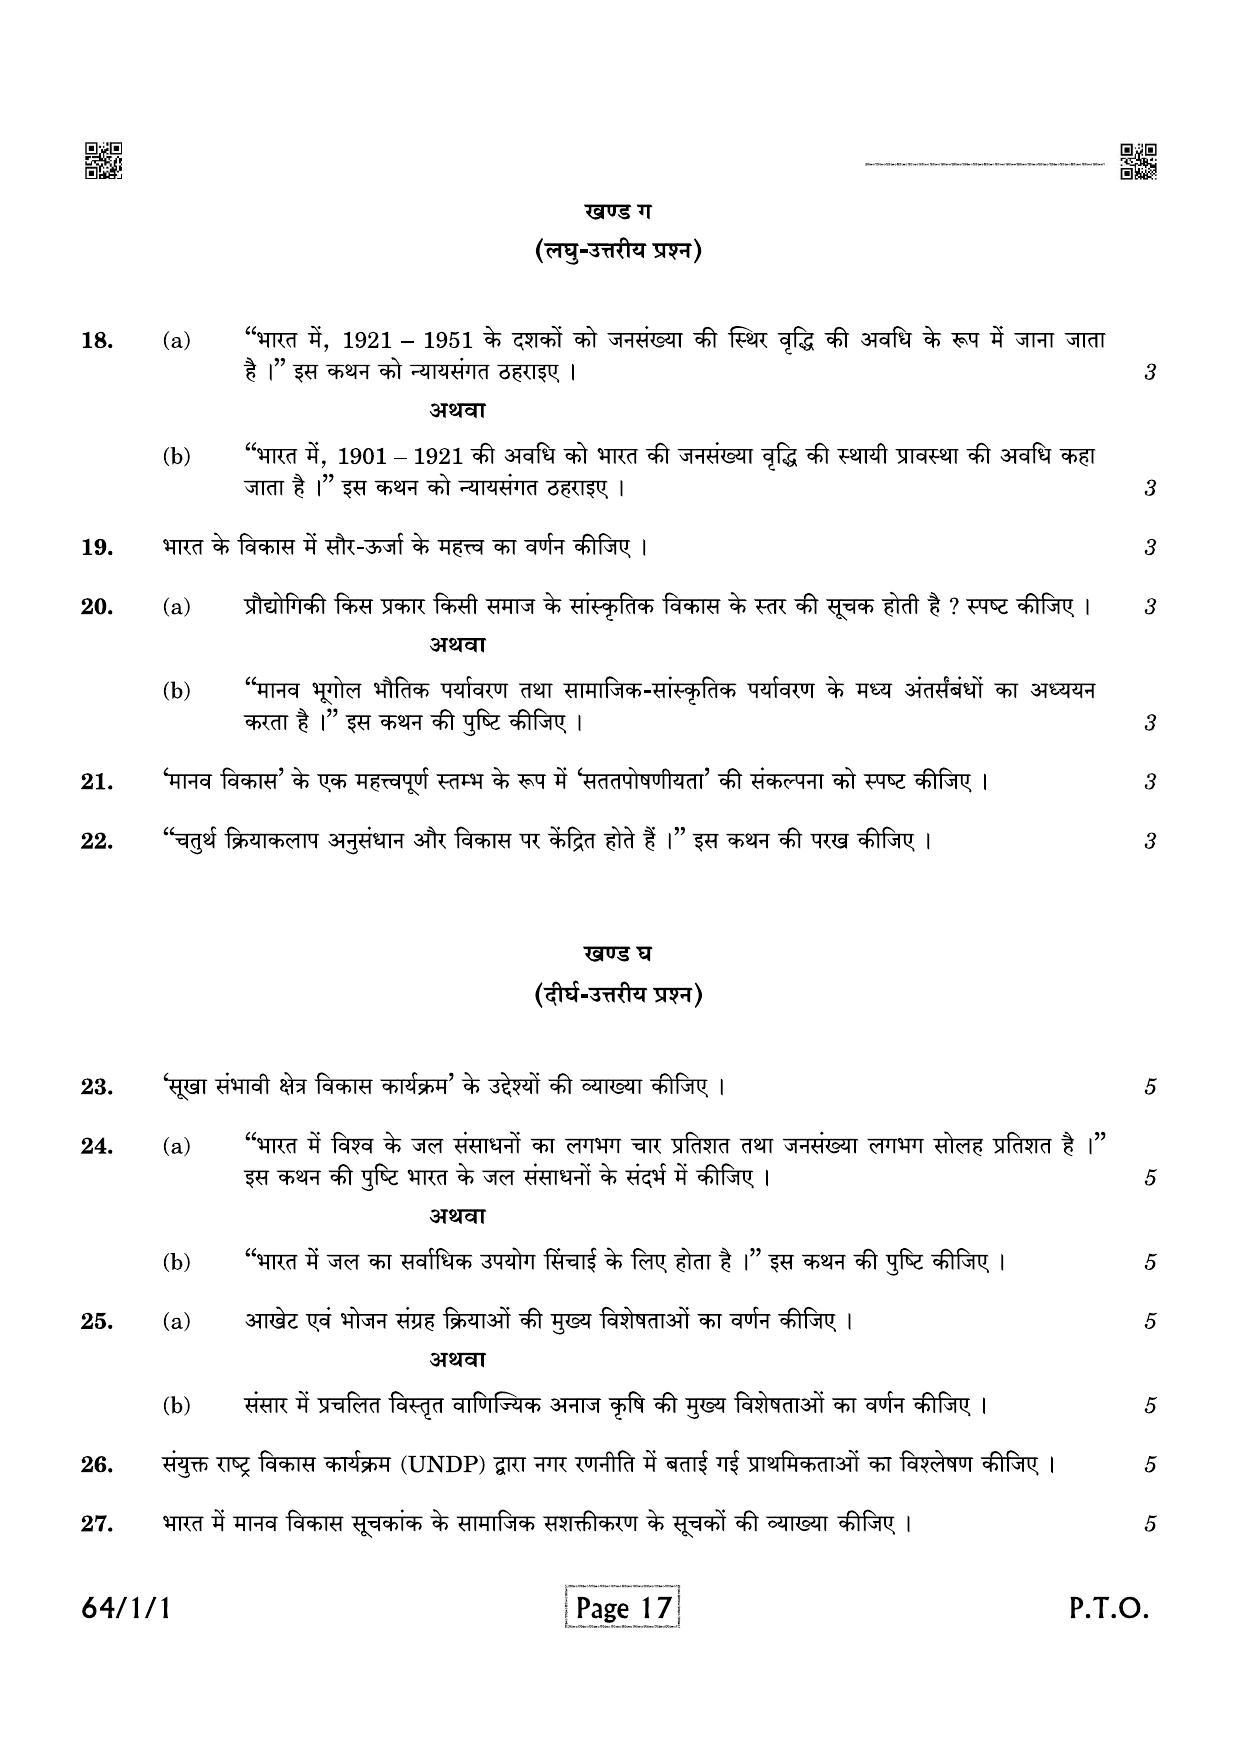 CBSE Class 12 QP_029_Geography 2021 Compartment Question Paper - Page 17